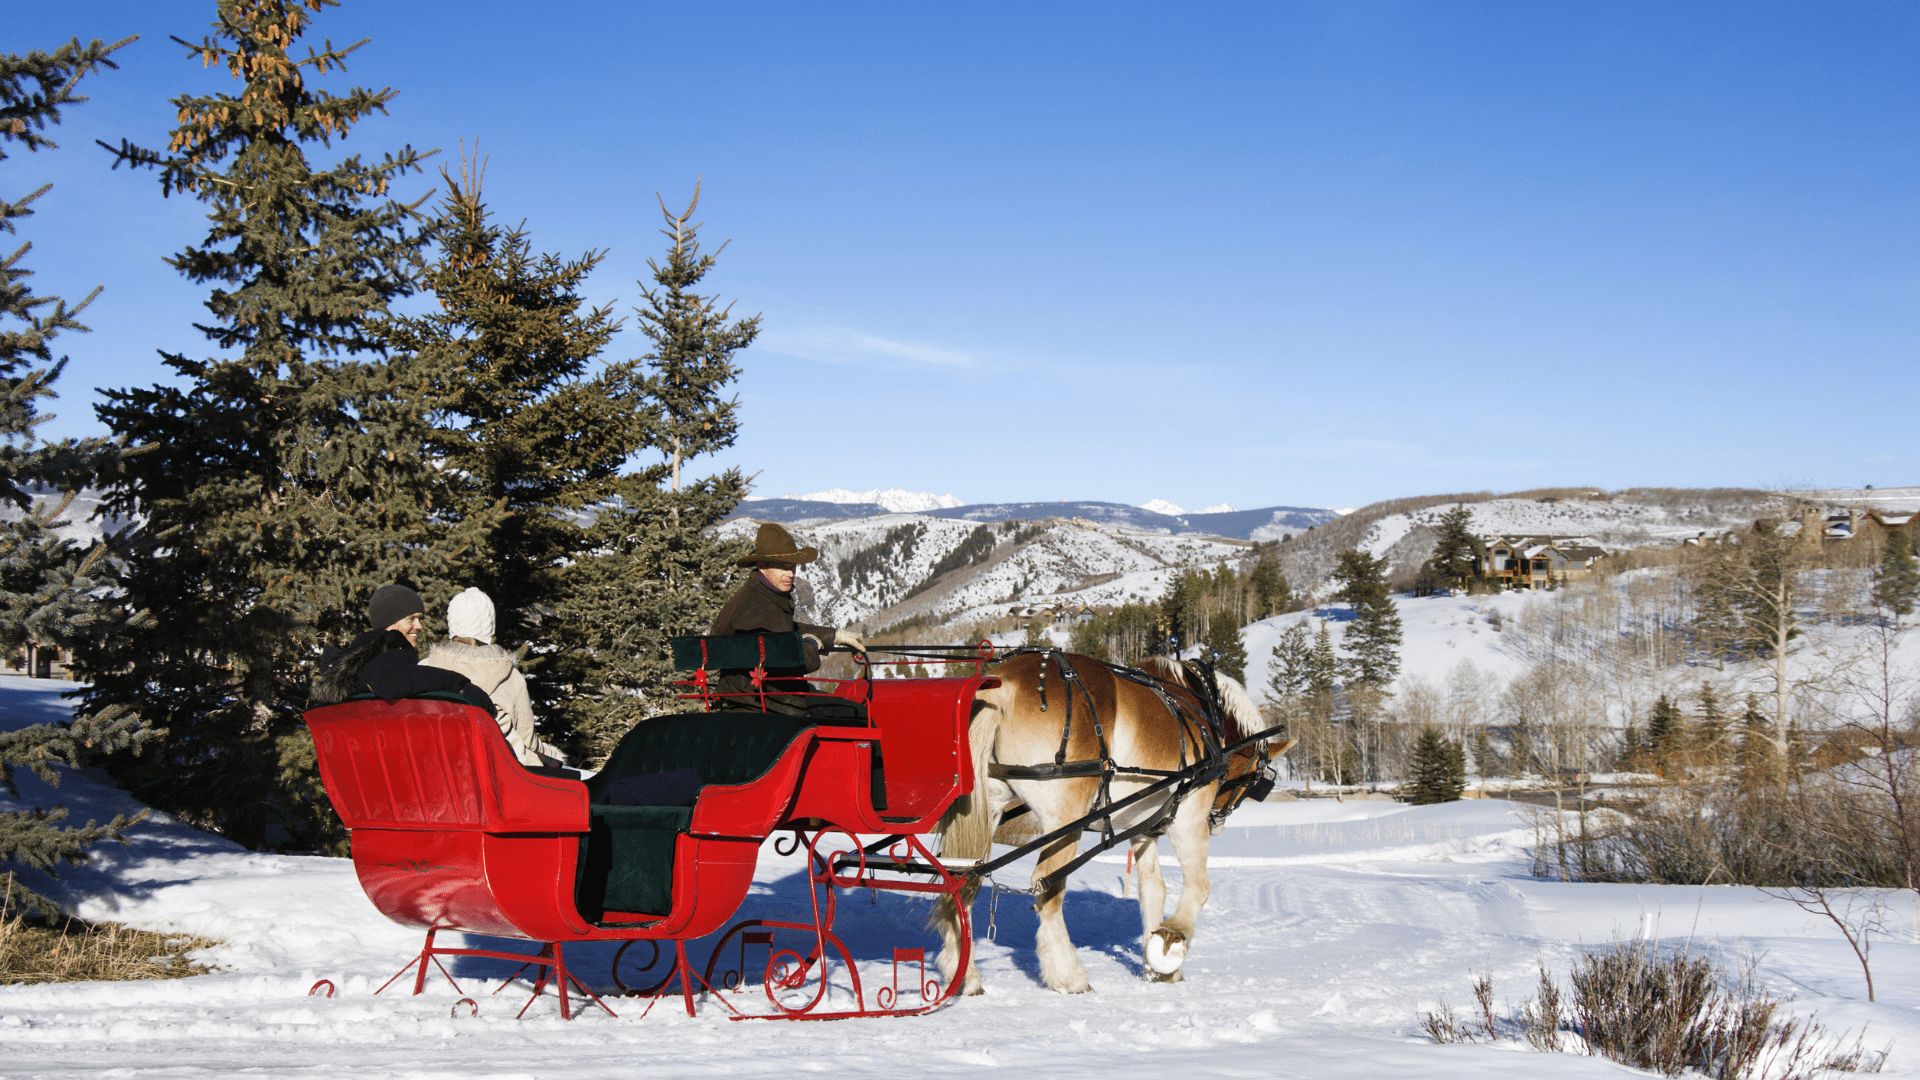 Sleigh_Rides_-_things_to_do_in_jackson_hole_in_winter[1]